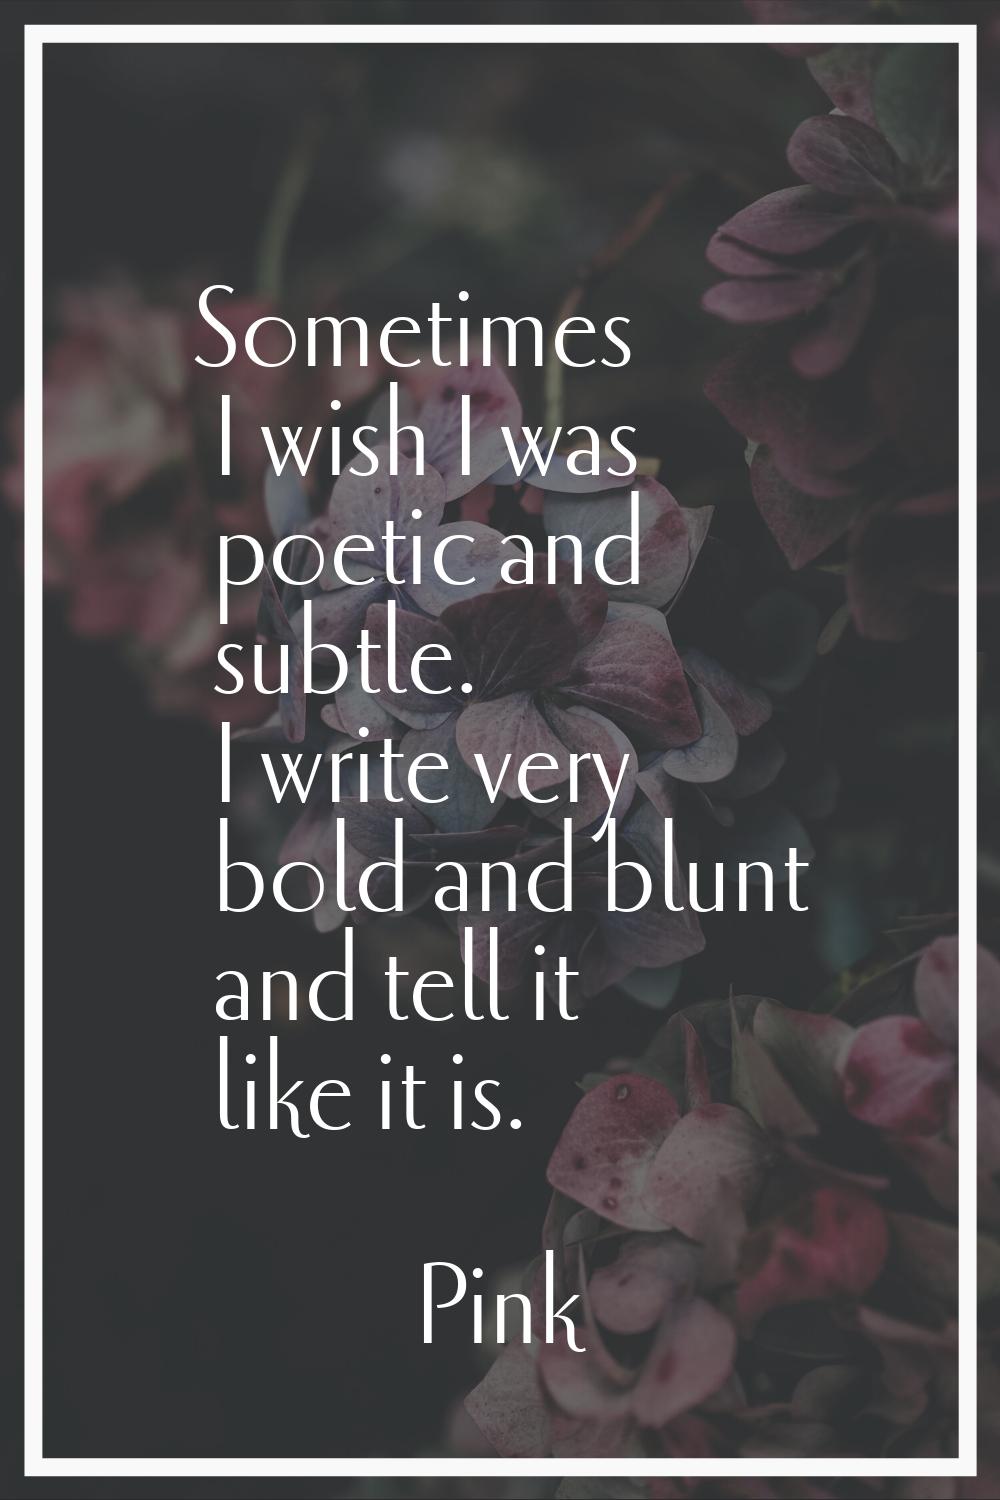 Sometimes I wish I was poetic and subtle. I write very bold and blunt and tell it like it is.